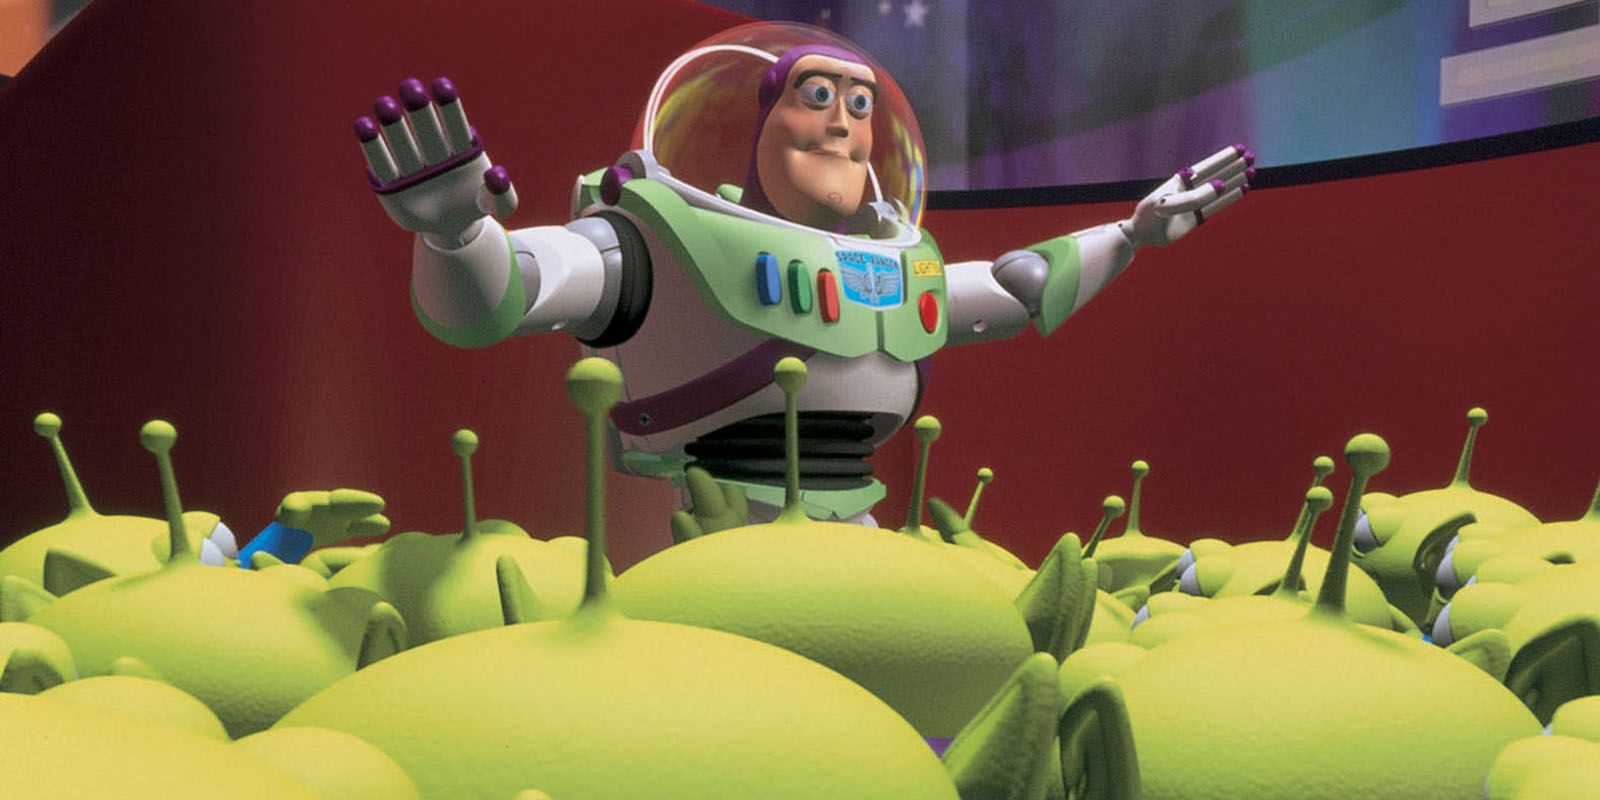 Buzz Lightyear standing over alien toys in Toy Story